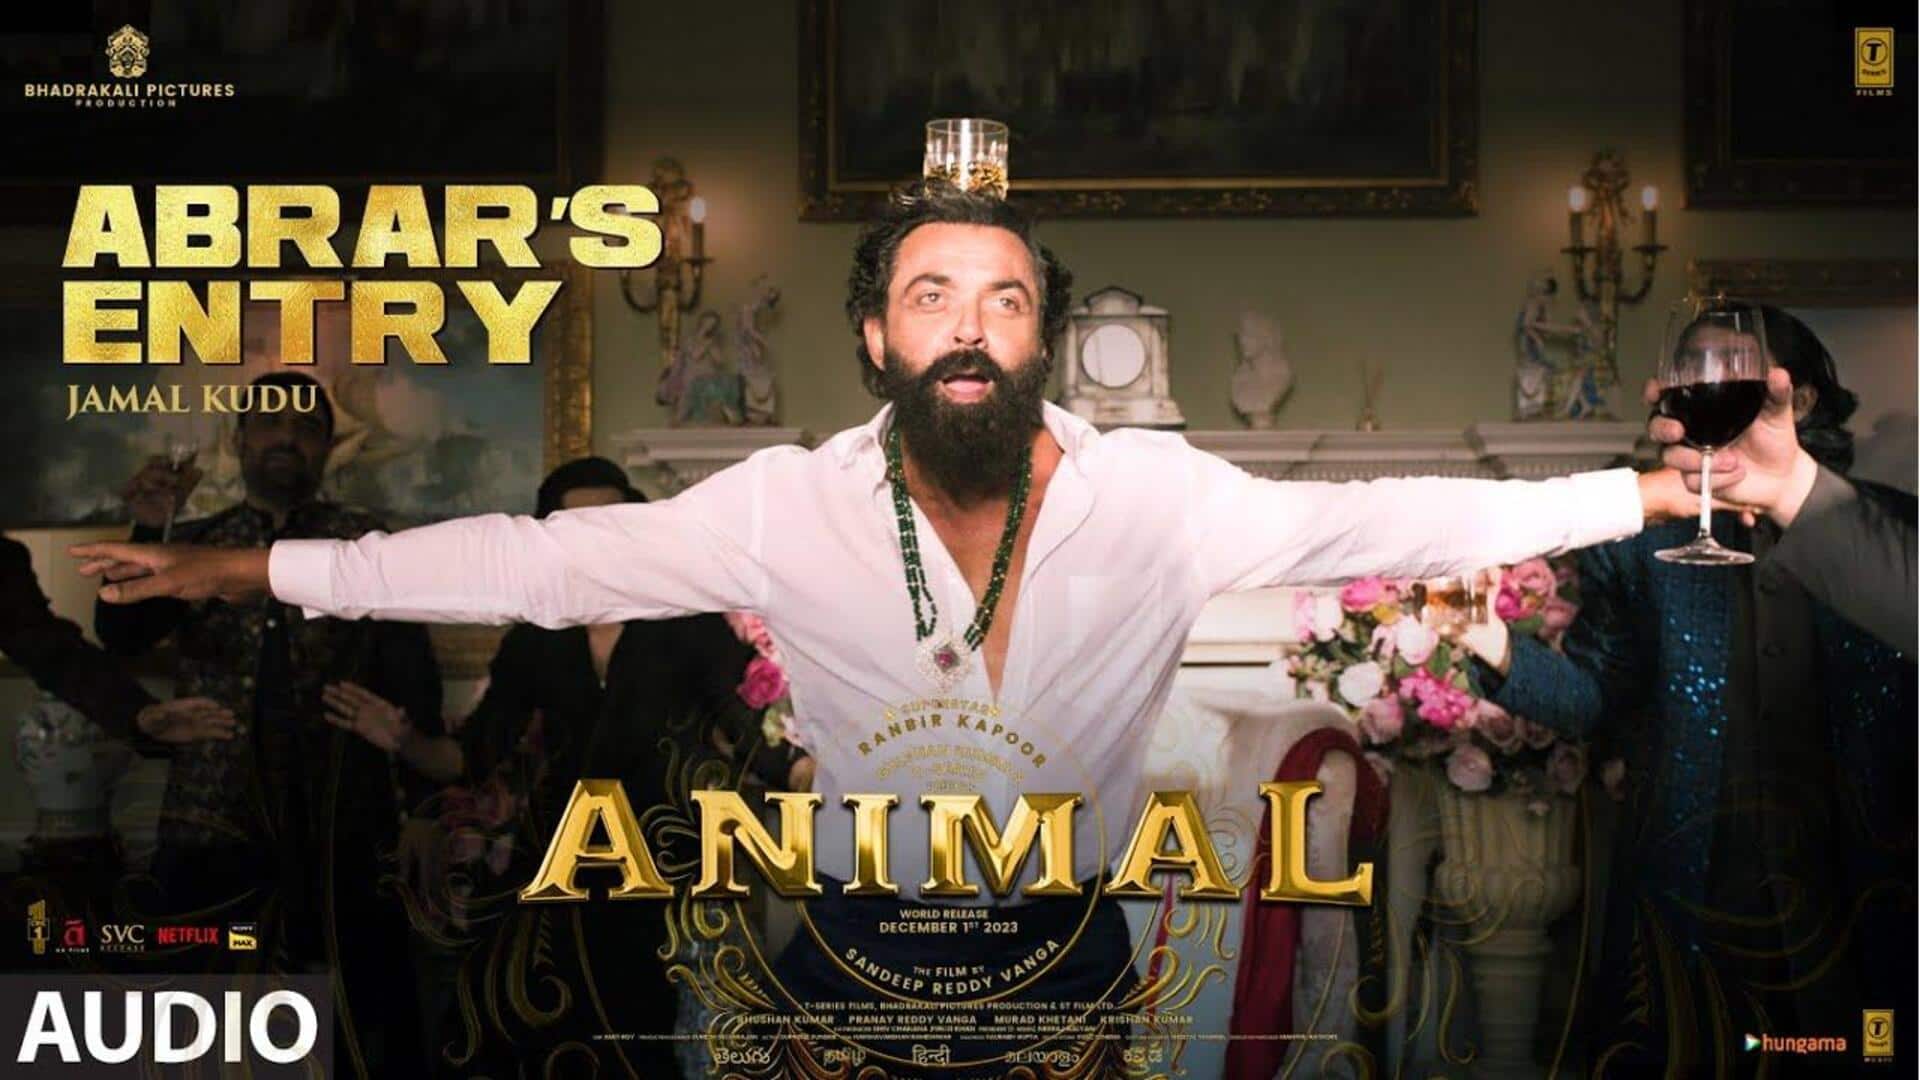 'Animal's 'Jamal Kudu': Bobby Deol's entry song is absolute banger